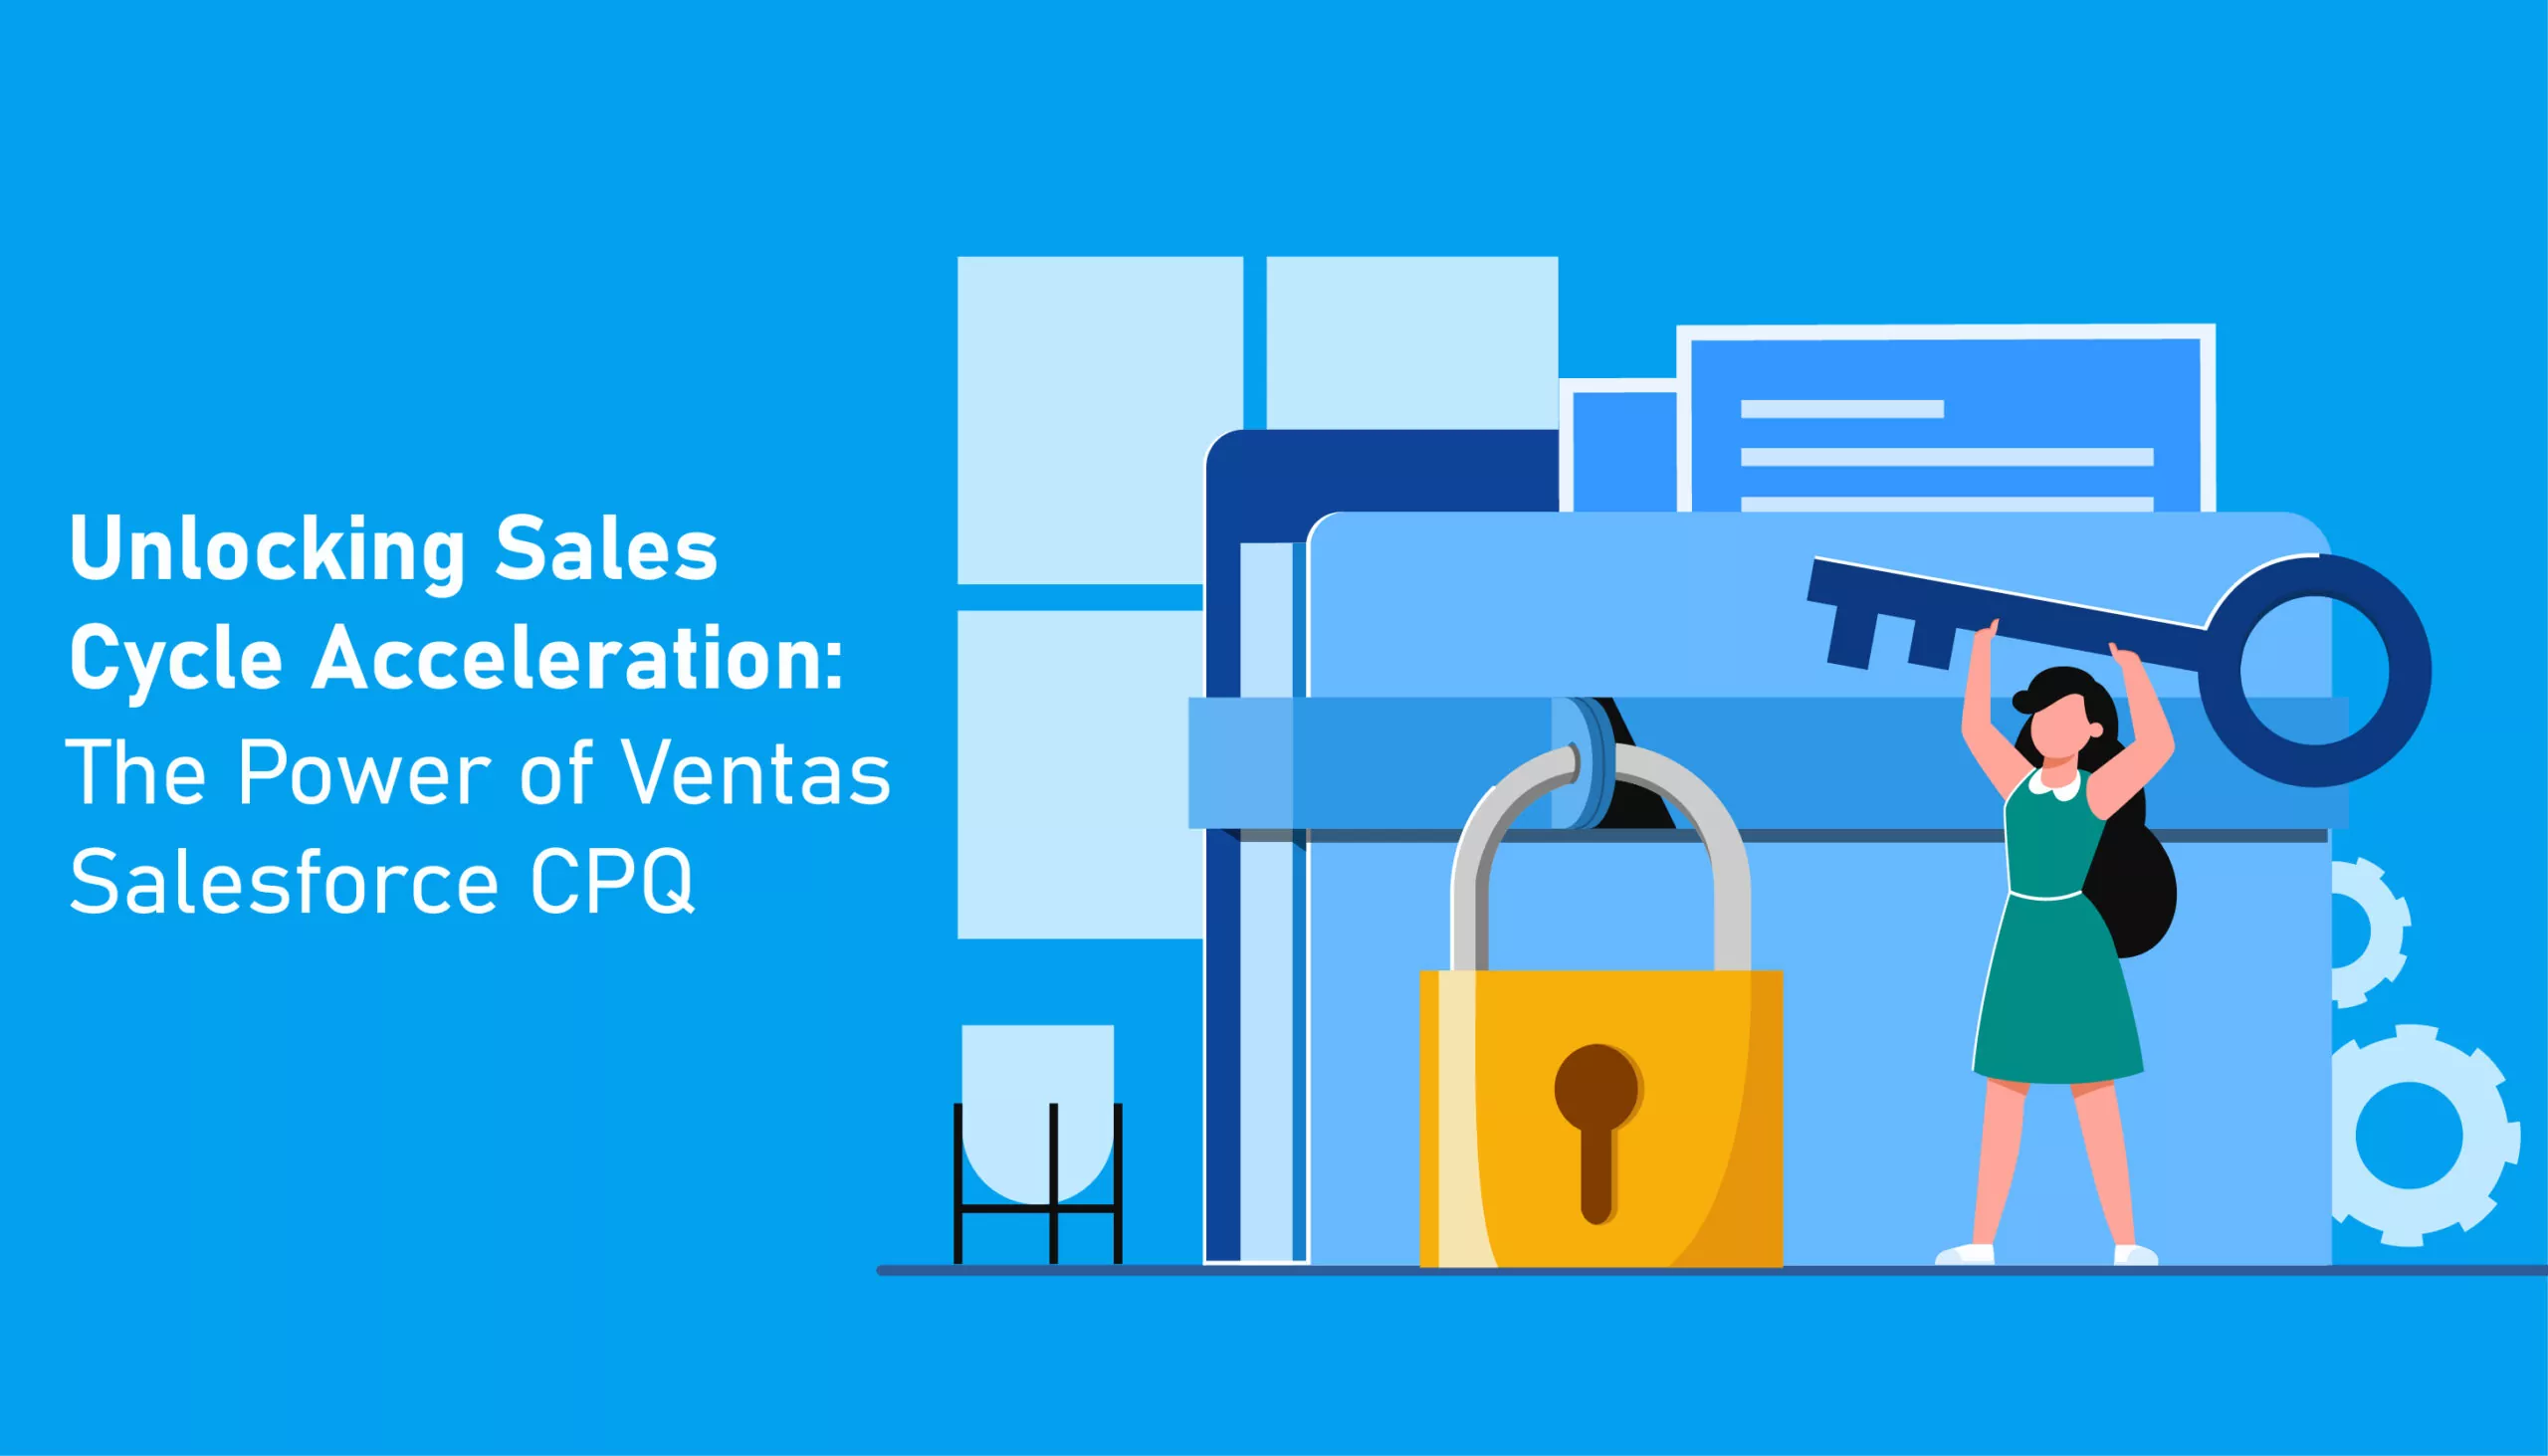 Unlocking Sales Cycle Acceleration: The Power of Ventas Salesforce CPQ featured image